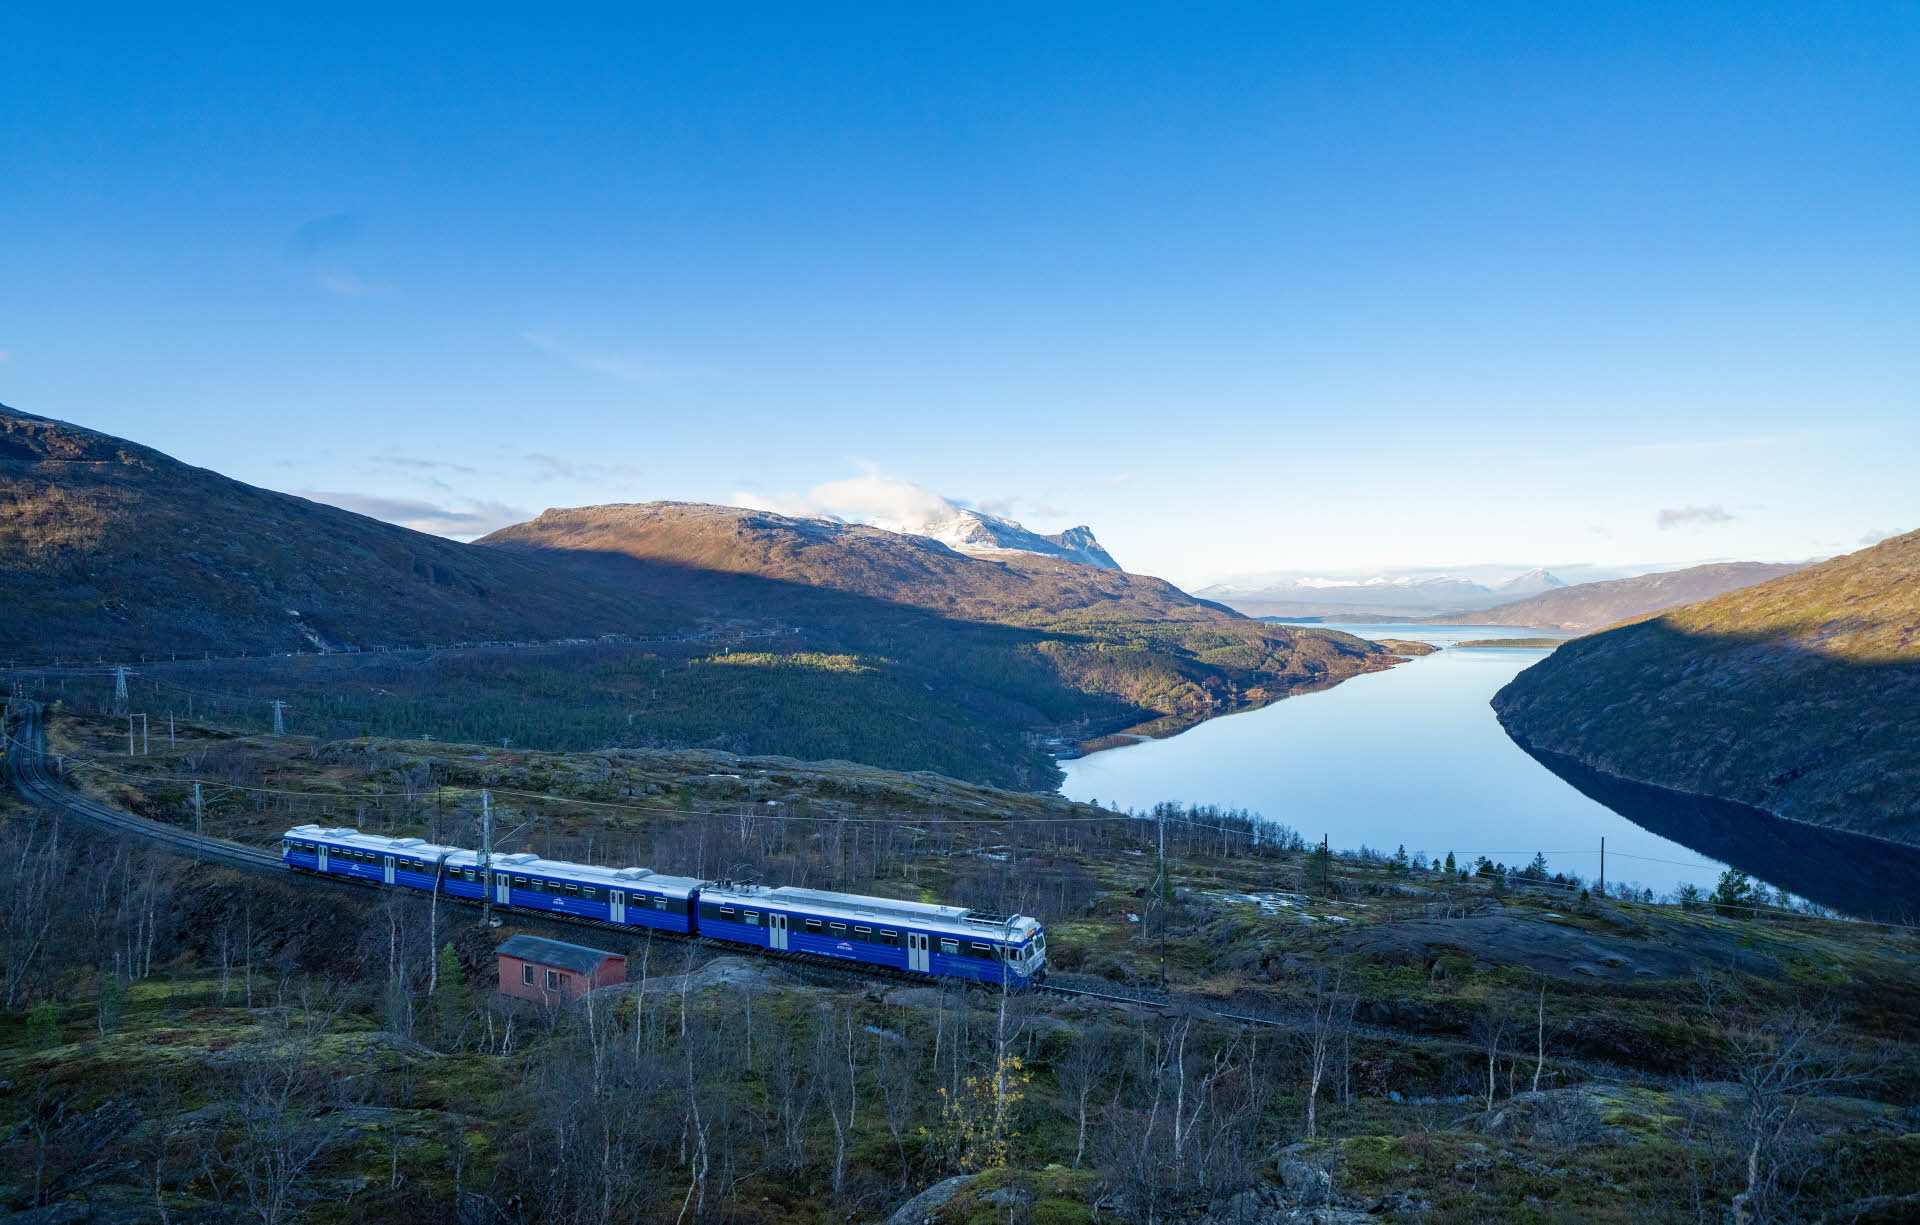 The Arctic Train on the Ofot Railway Line above Rombak fjord with snow mountains in the background.